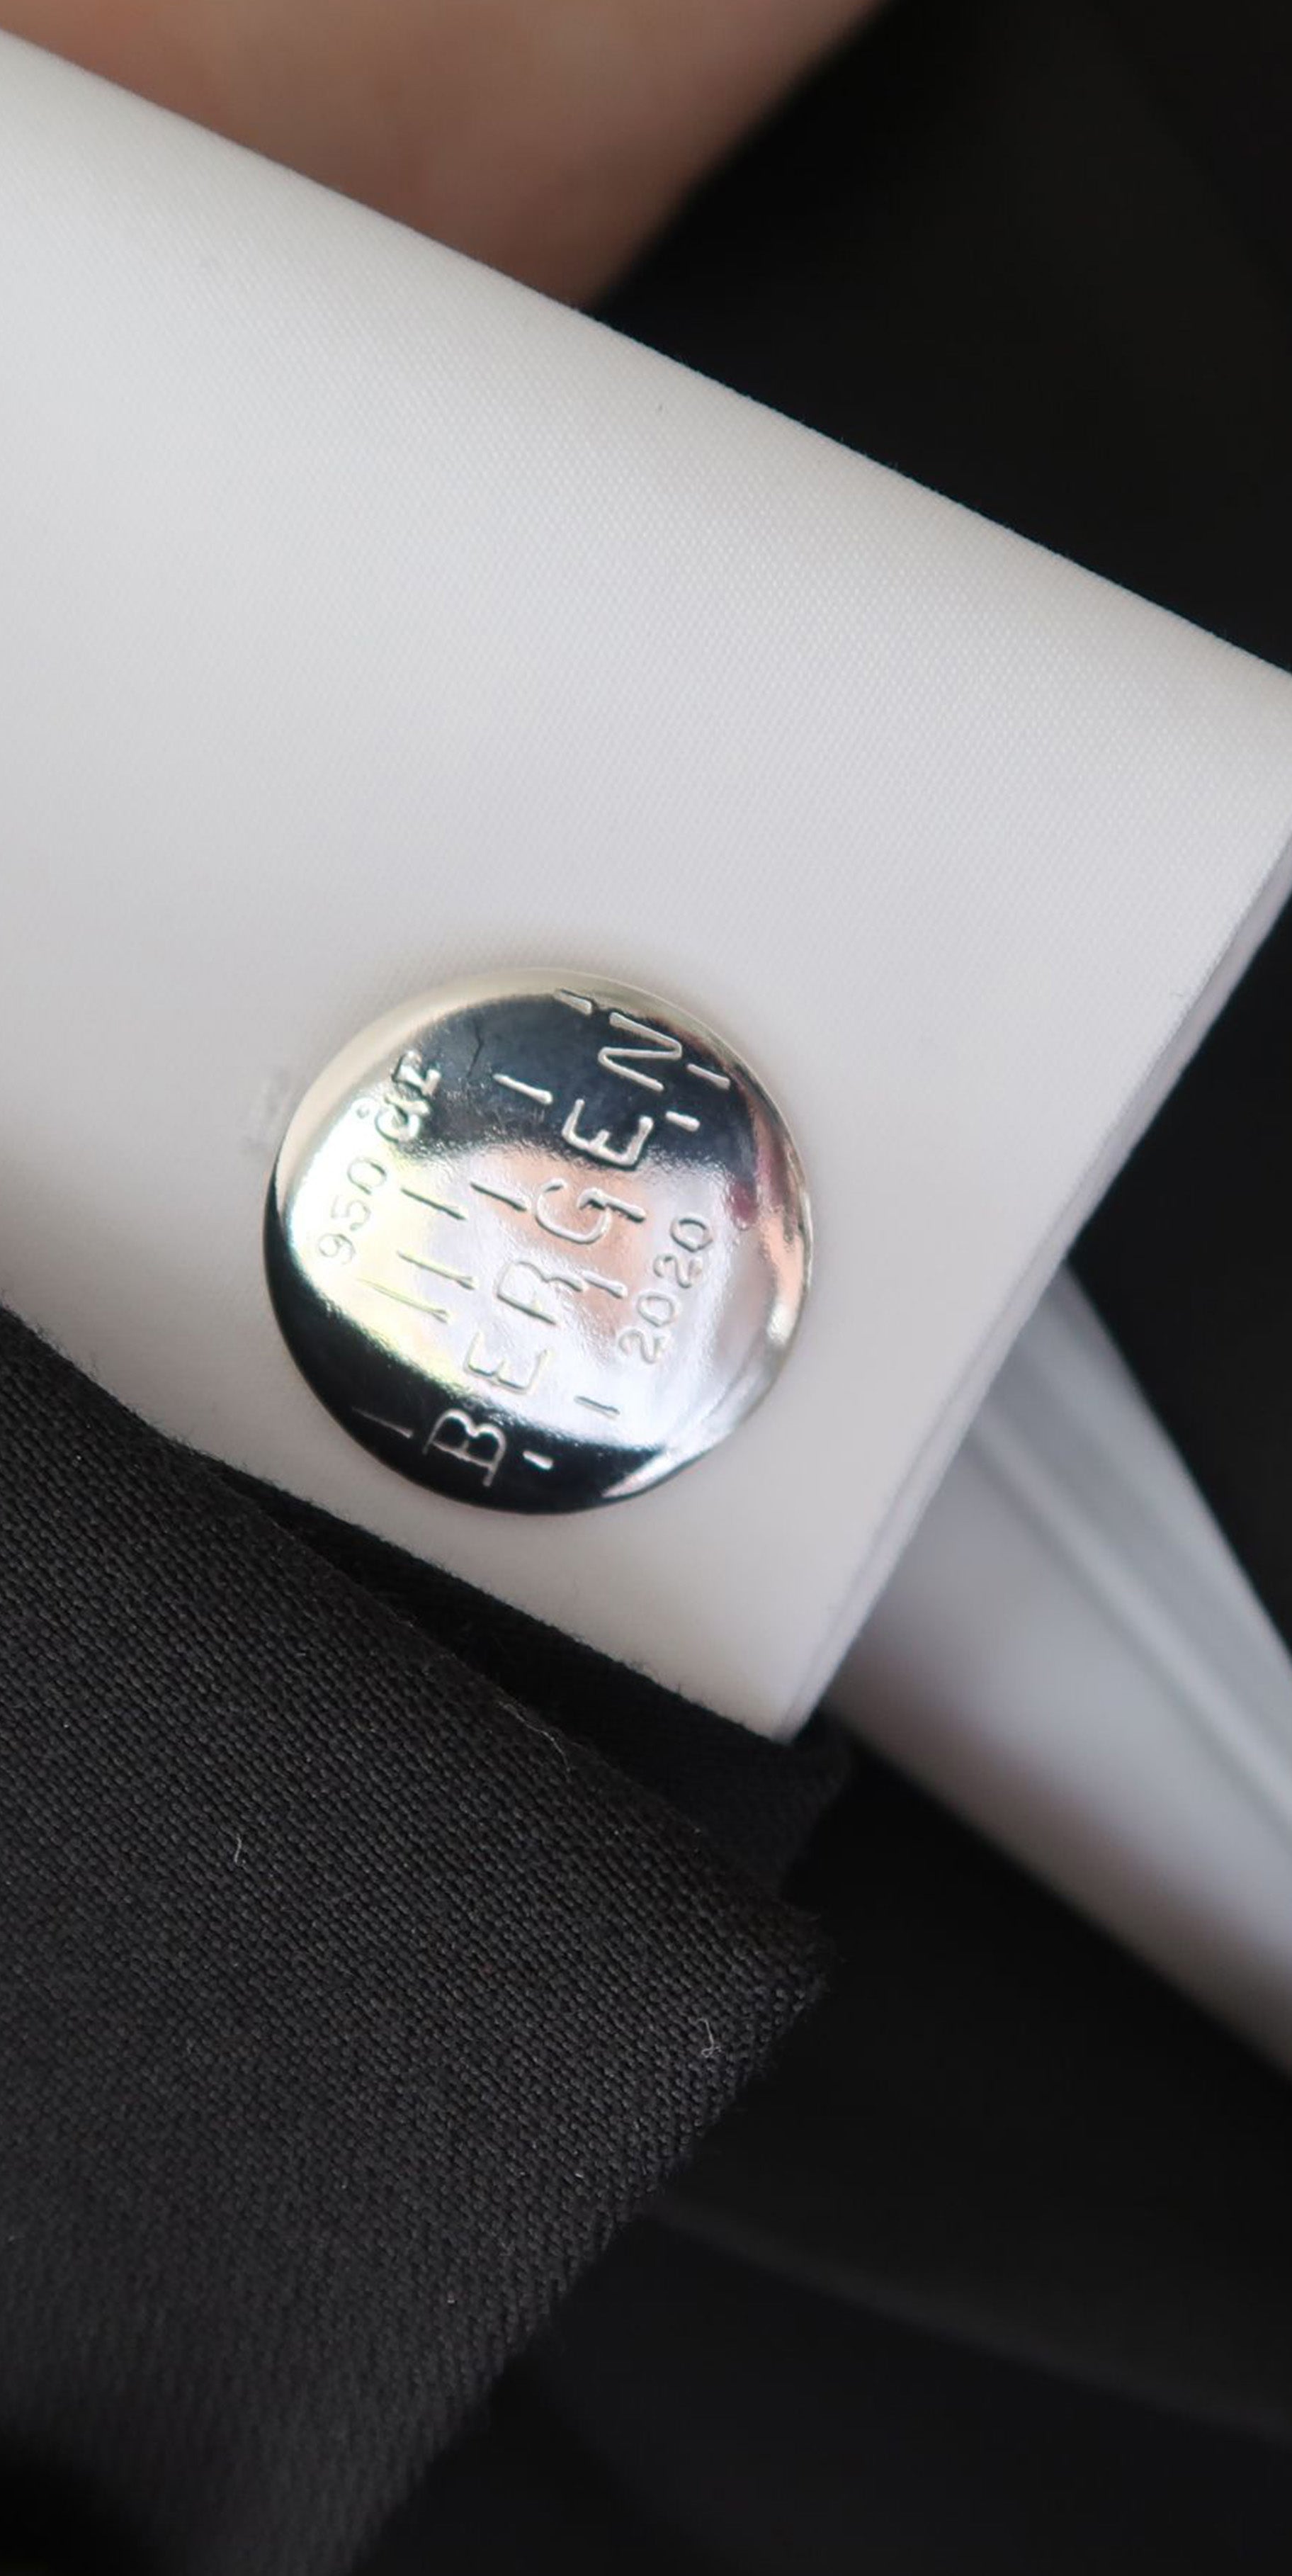 Cufflinks with official 950th anniversary logo